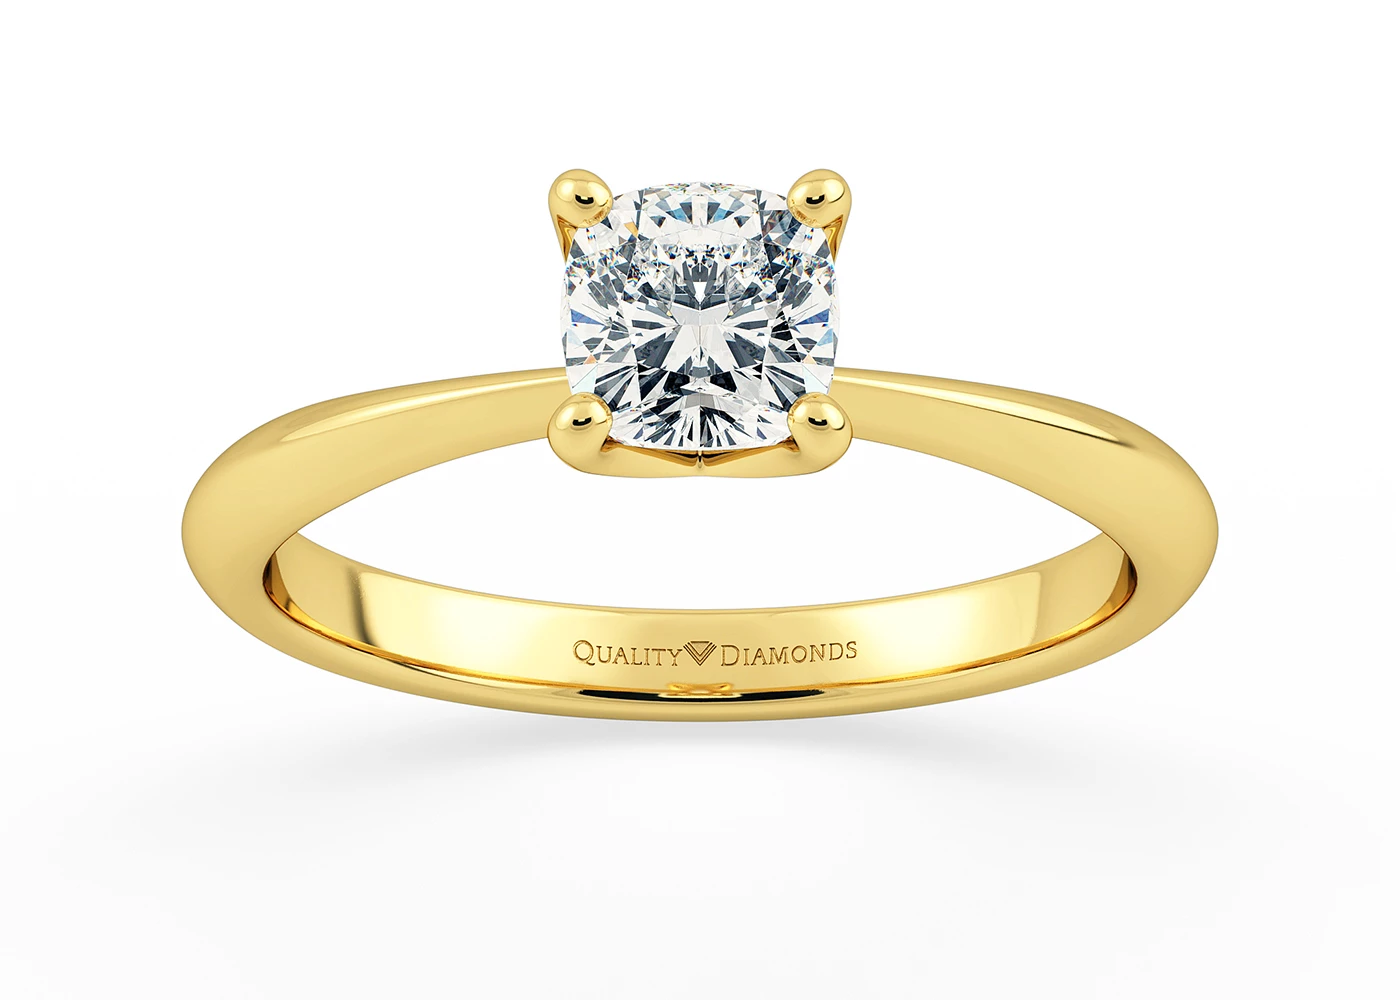 Two Carat Cushion Solitaire Diamond Engagement Ring in 18K Yellow Gold